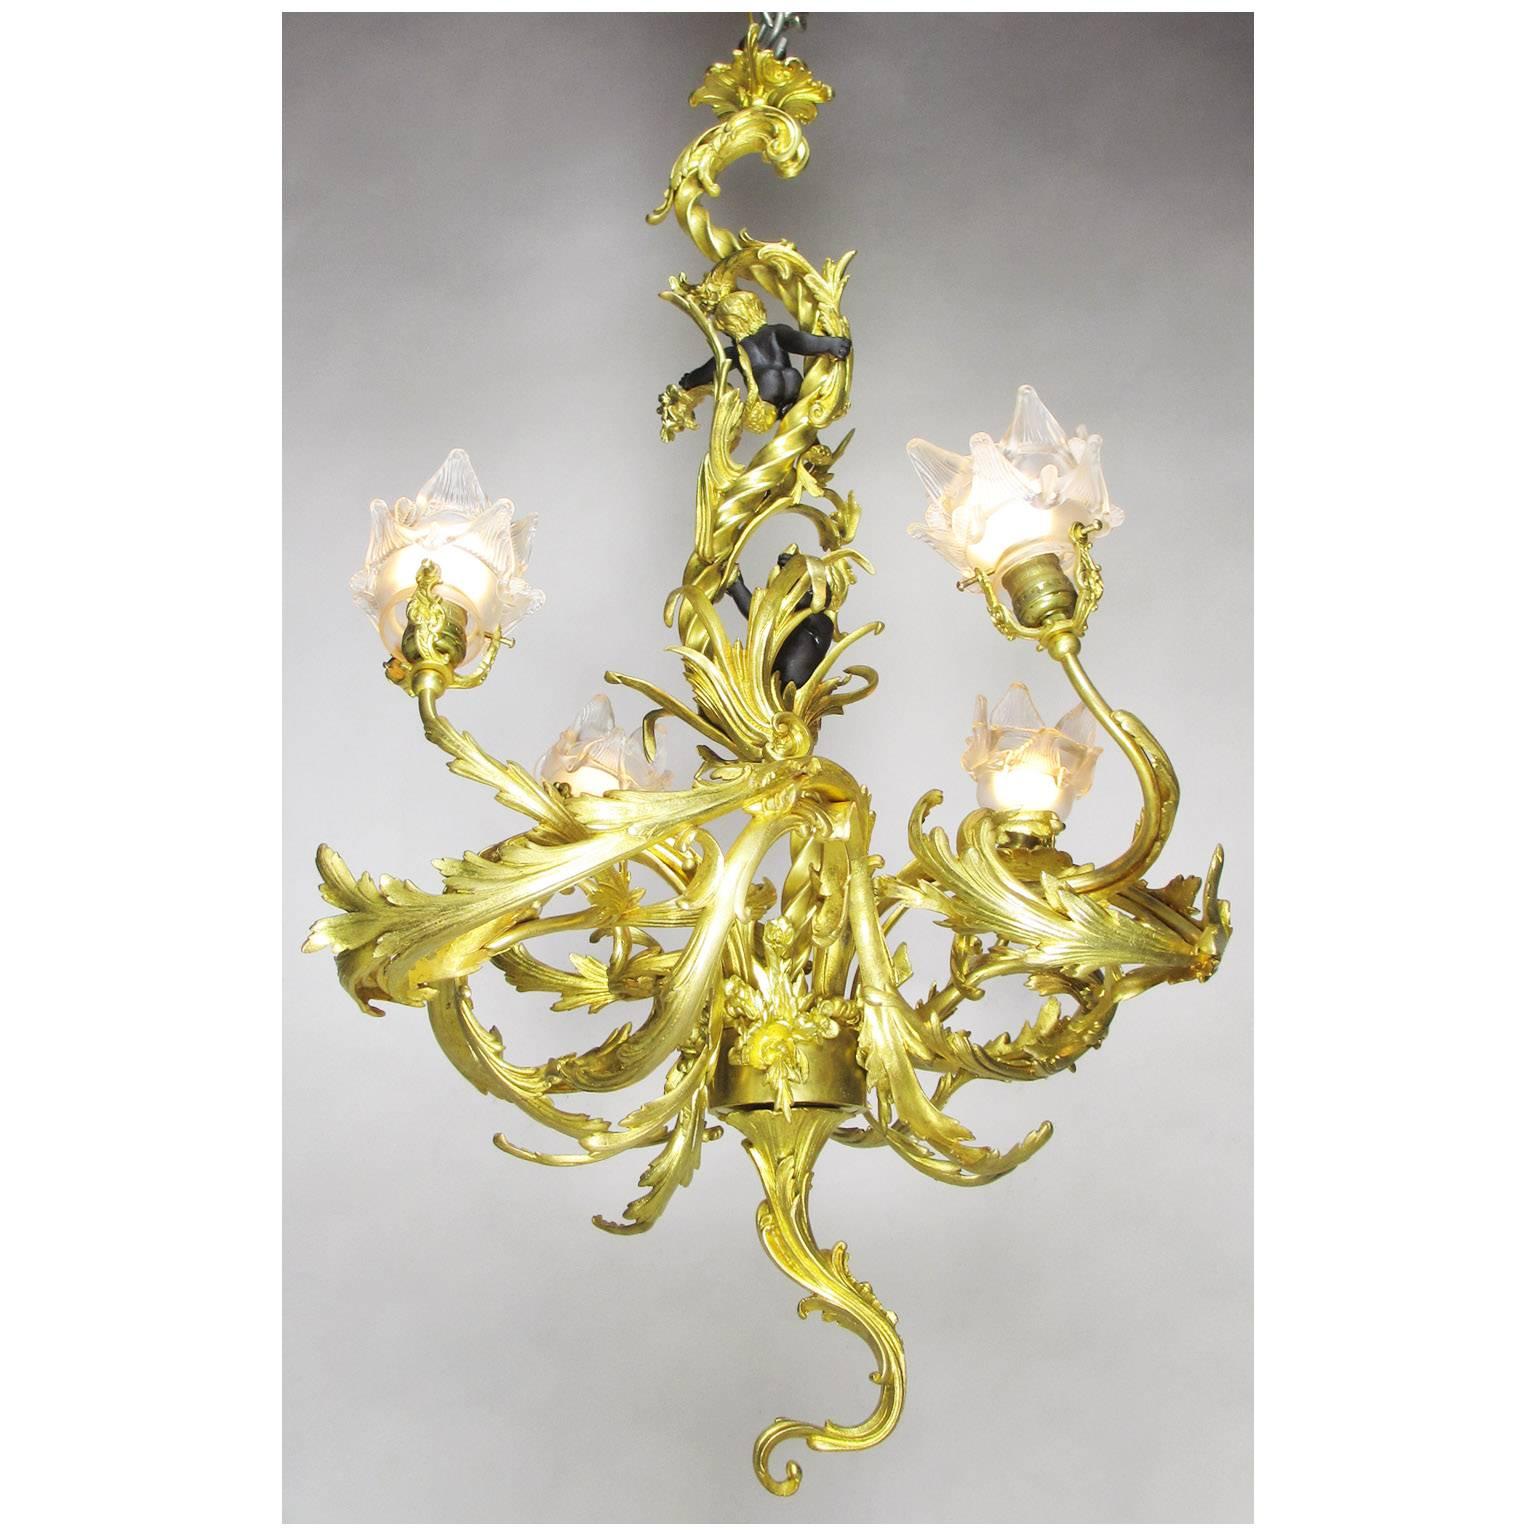 Early 20th Century French Belle Époque Gilt Bronze Four-Light Whimsical Chandelier For Sale